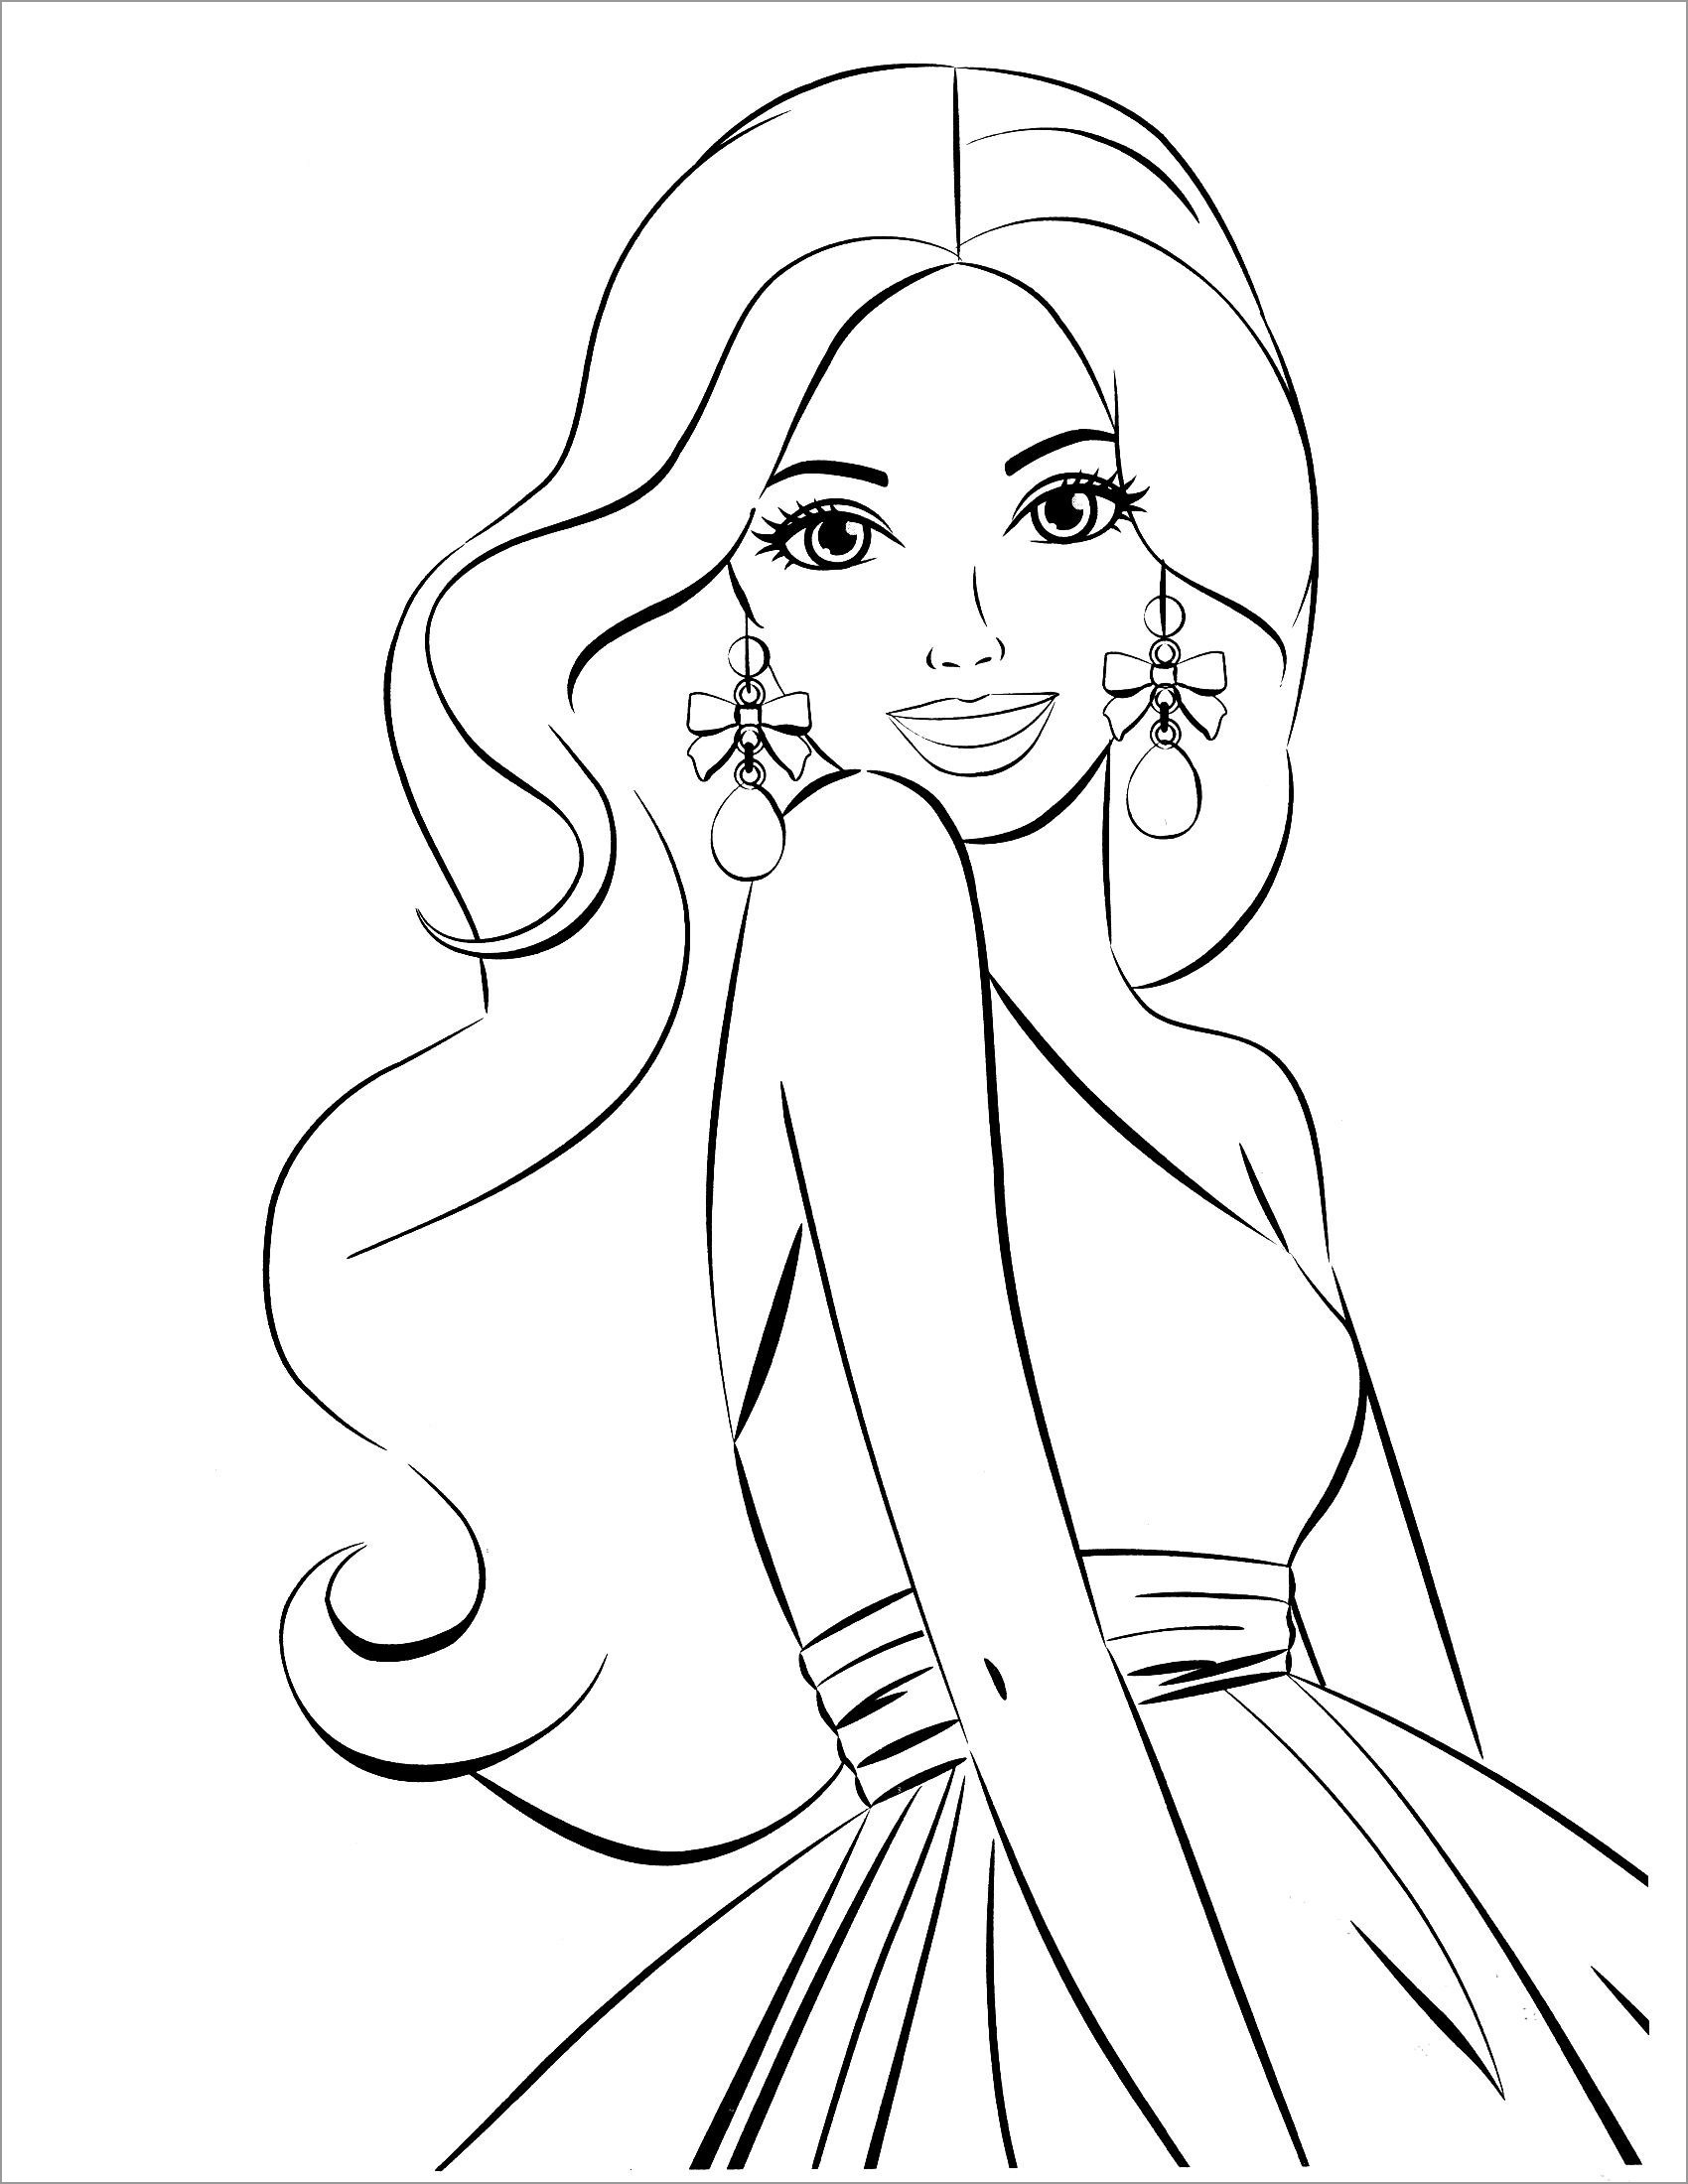 Easy Barbie Coloring Page for Kids   ColoringBay